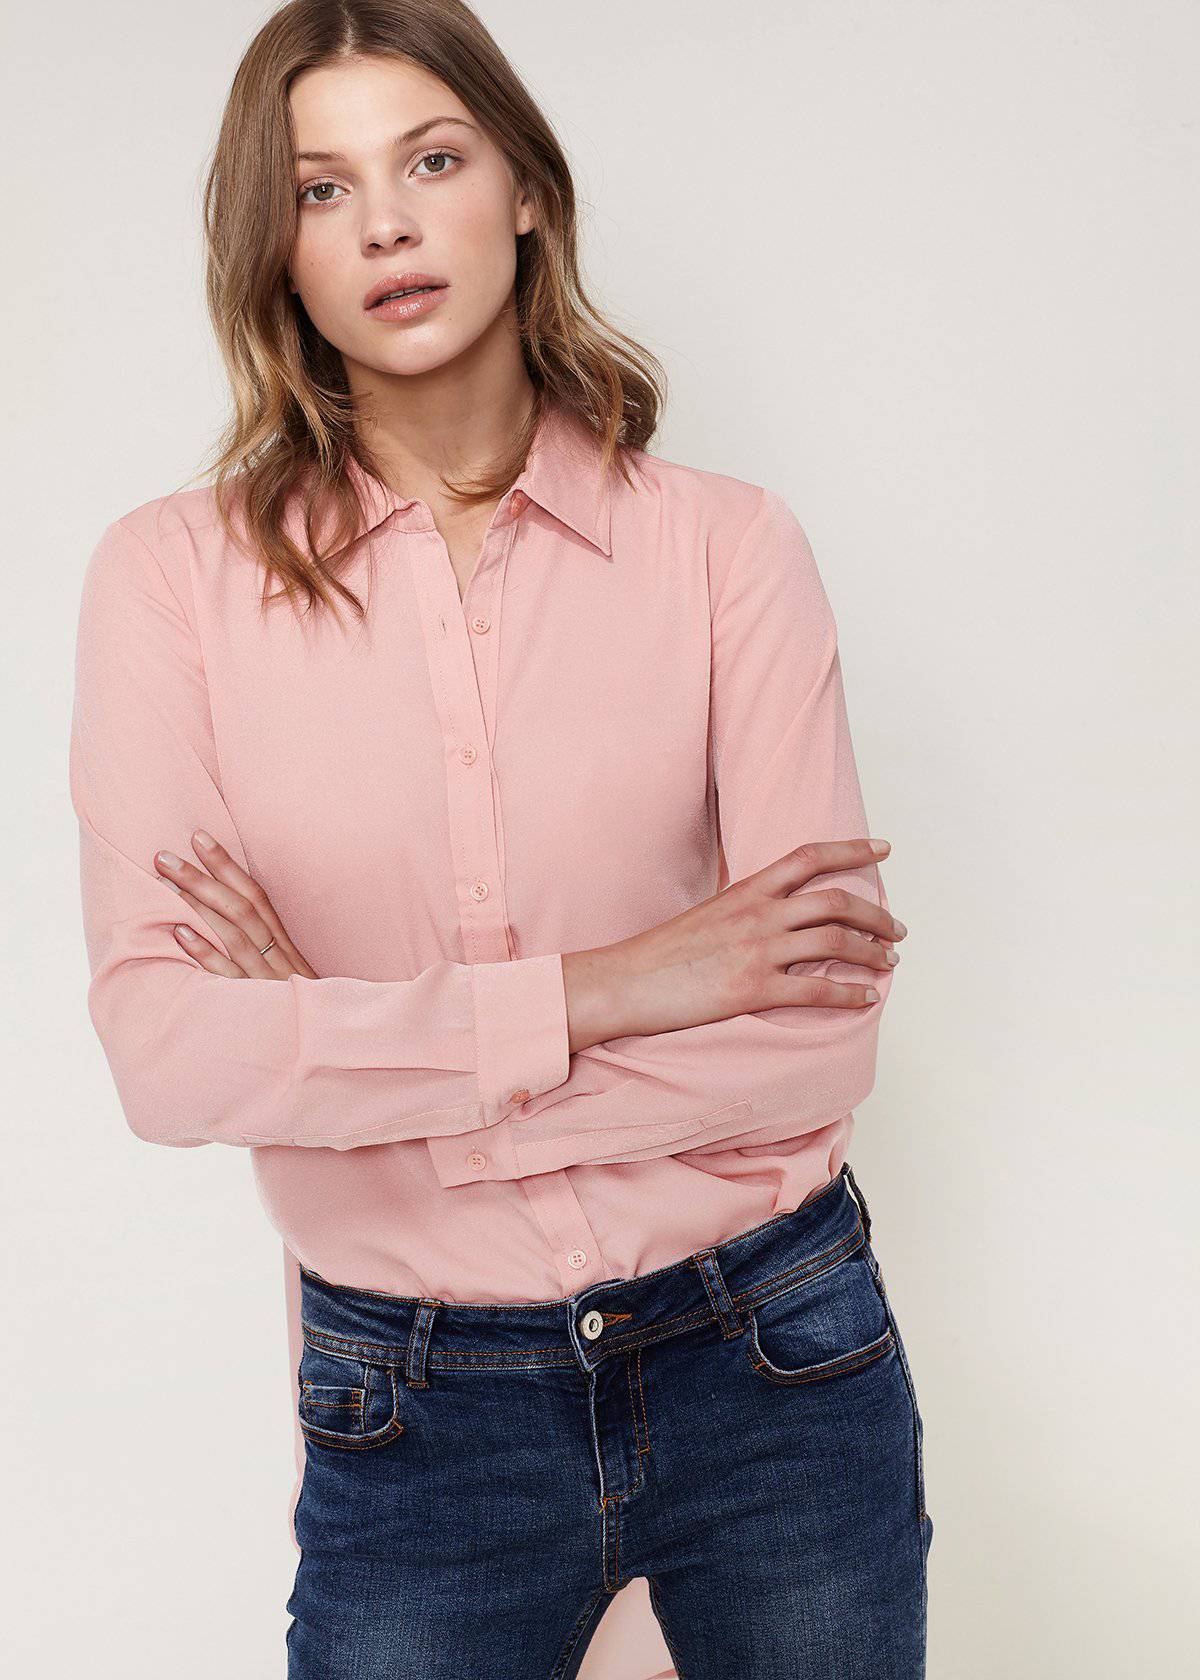 Women's Belted Hi-lo Blouse In Peach Apricot by Shop at Konus